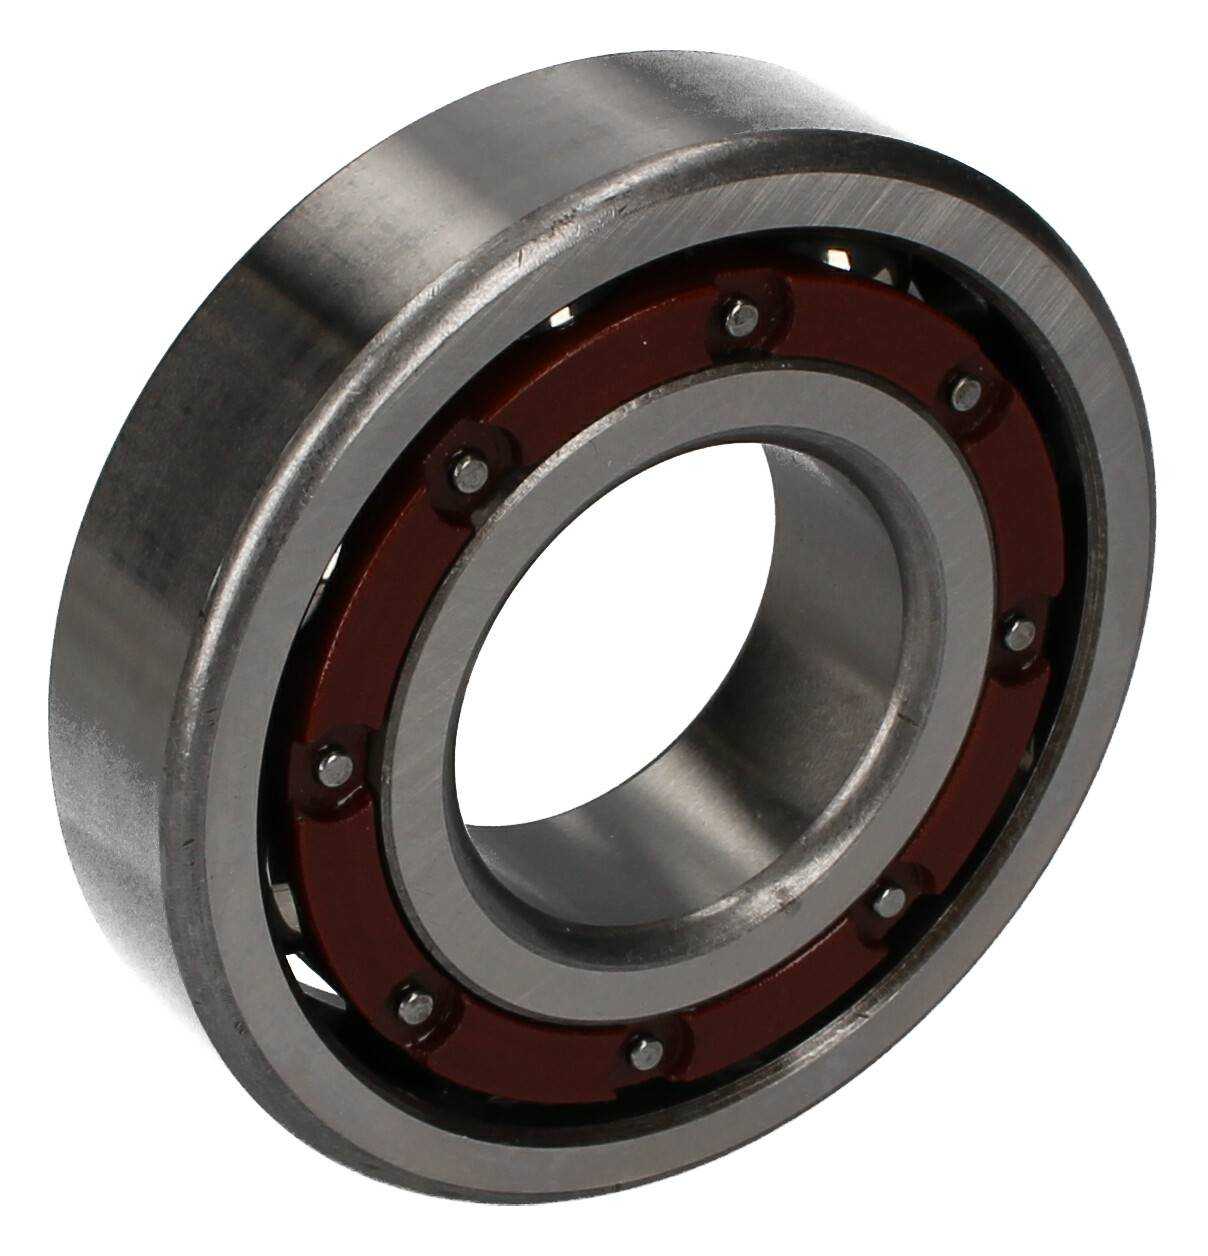 HIGH SPEED BALL BEARING 6002-THB-P6-IBC (WITHOUT PACKAGING) - Image 1